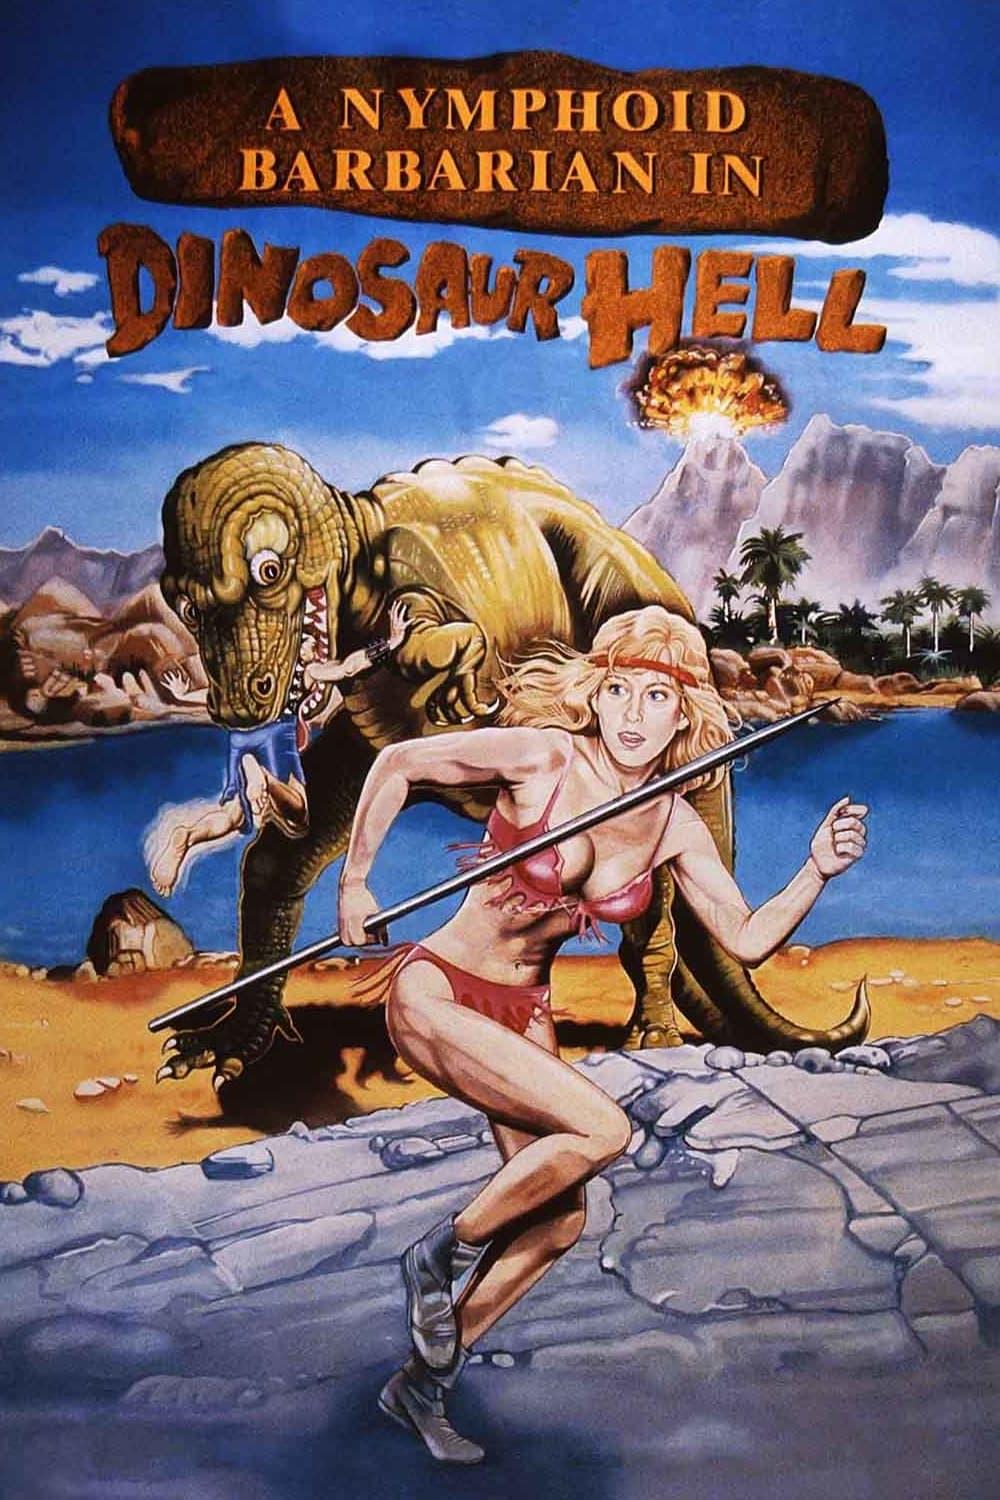 A Nymphoid Barbarian in Dinosaur Hell poster